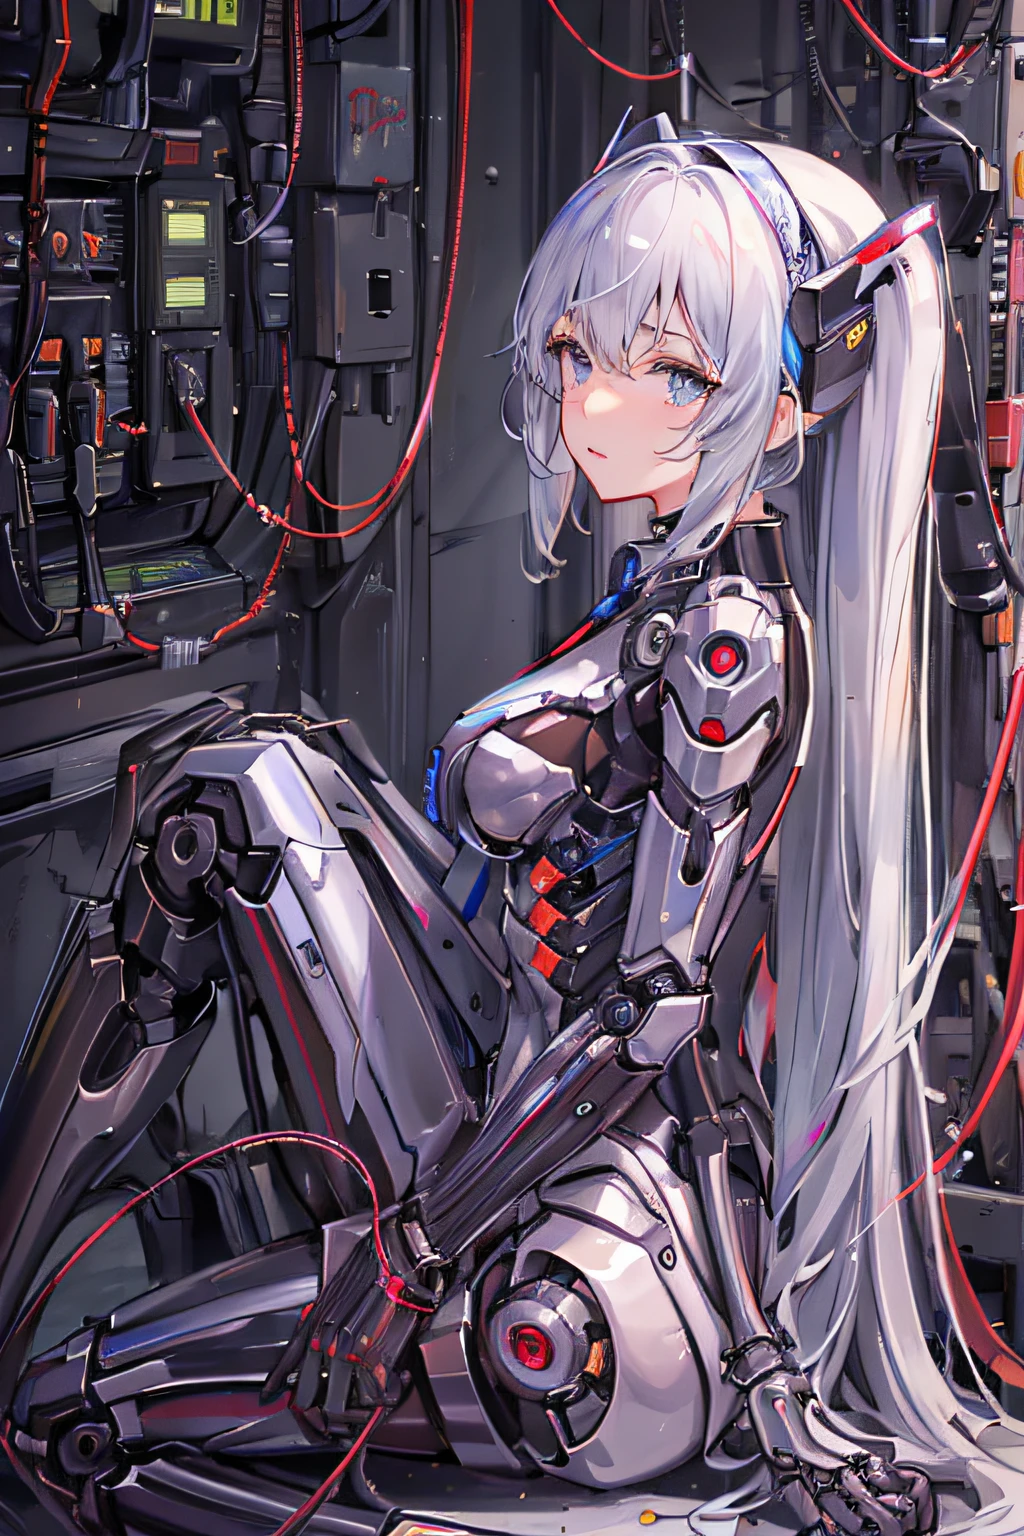 Anime girl sitting on the ground with a robot in front of her, cyborg - girl with silver hair, biomechanical oppai, Cute cyborg girl, Cyborg girl, beautiful girl cyborg, Perfect Anime Cyborg Woman, perfect android girl, Cyborg - Girl, anime cyborg, beutiful white girl cyborg, fully robotic!! girl, Cyberpunk anime girl mecha